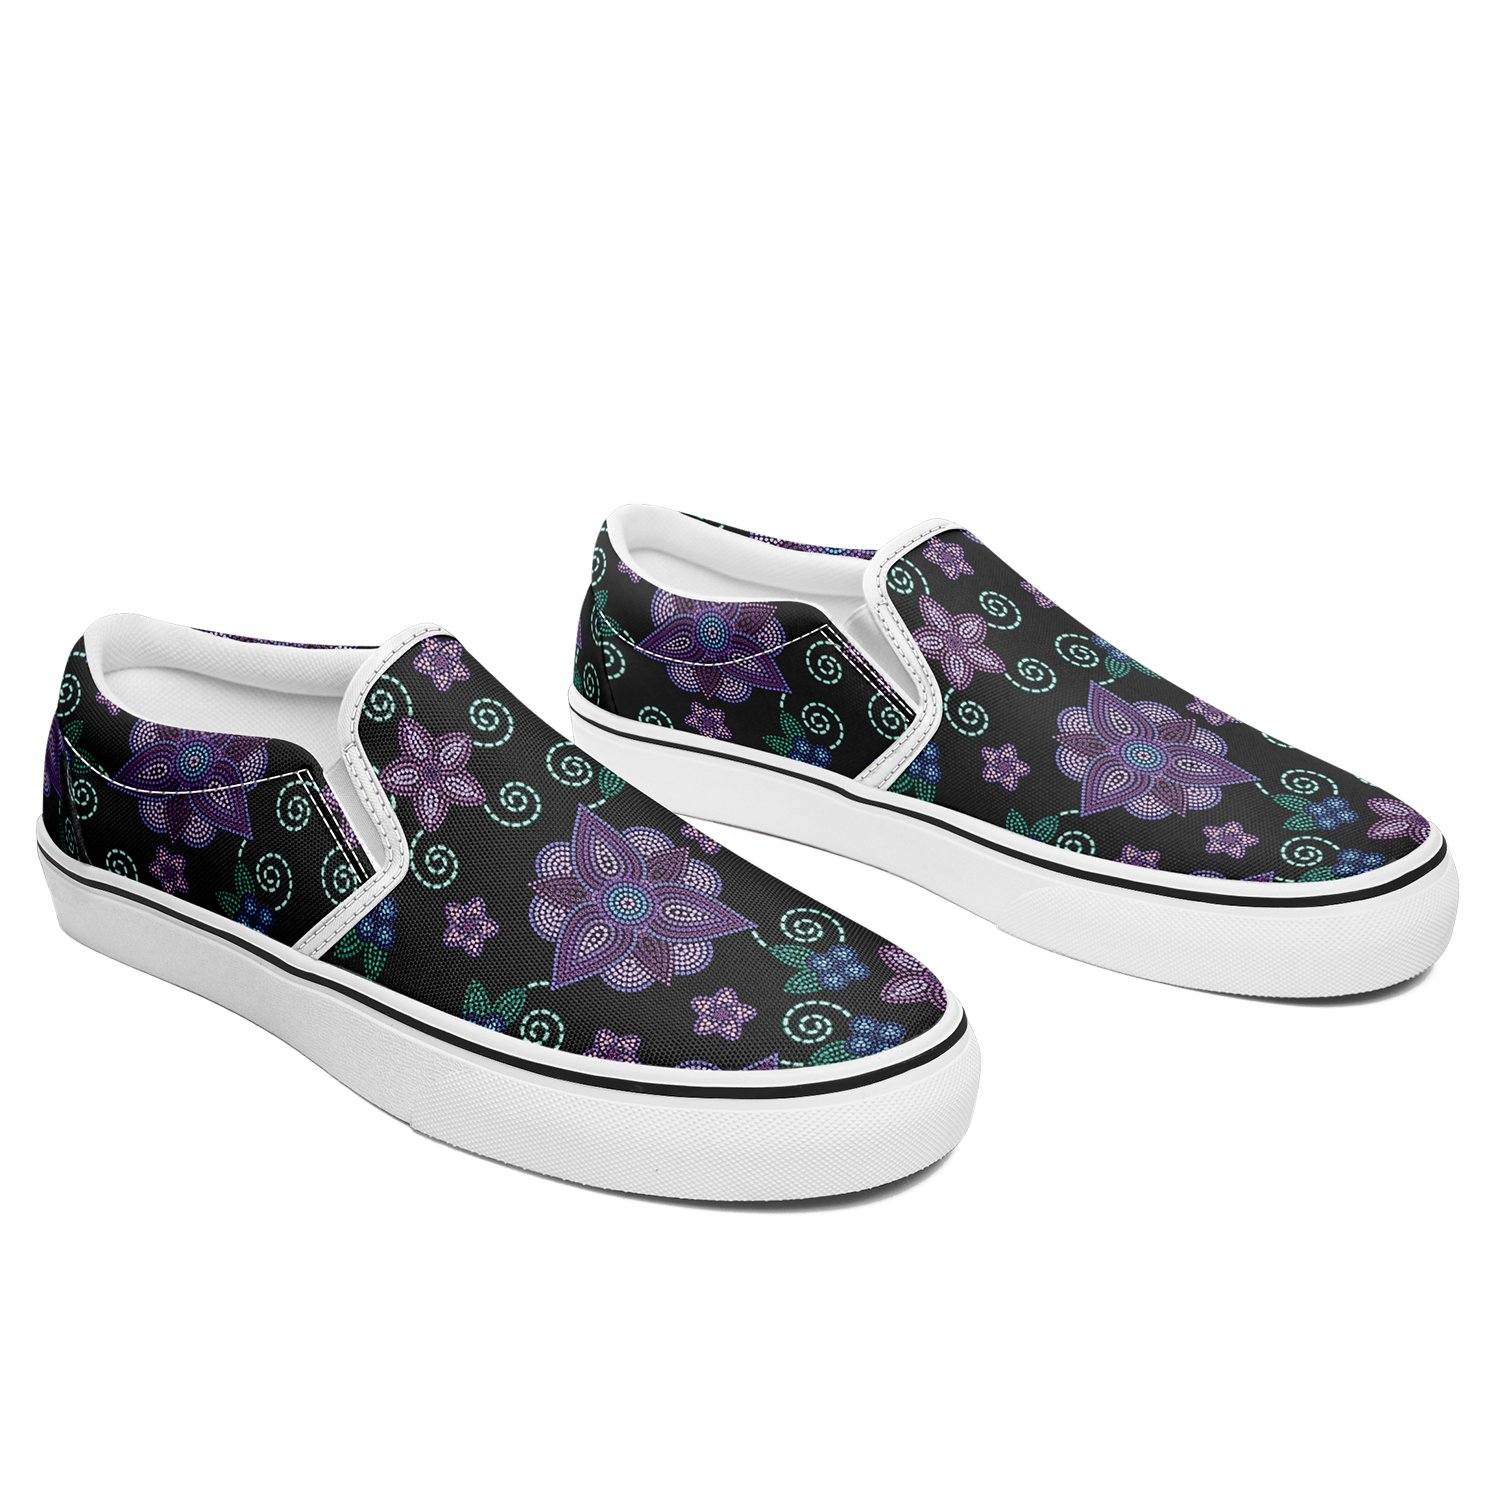 Berry Picking Otoyimm Canvas Slip On Shoes otoyimm Herman 